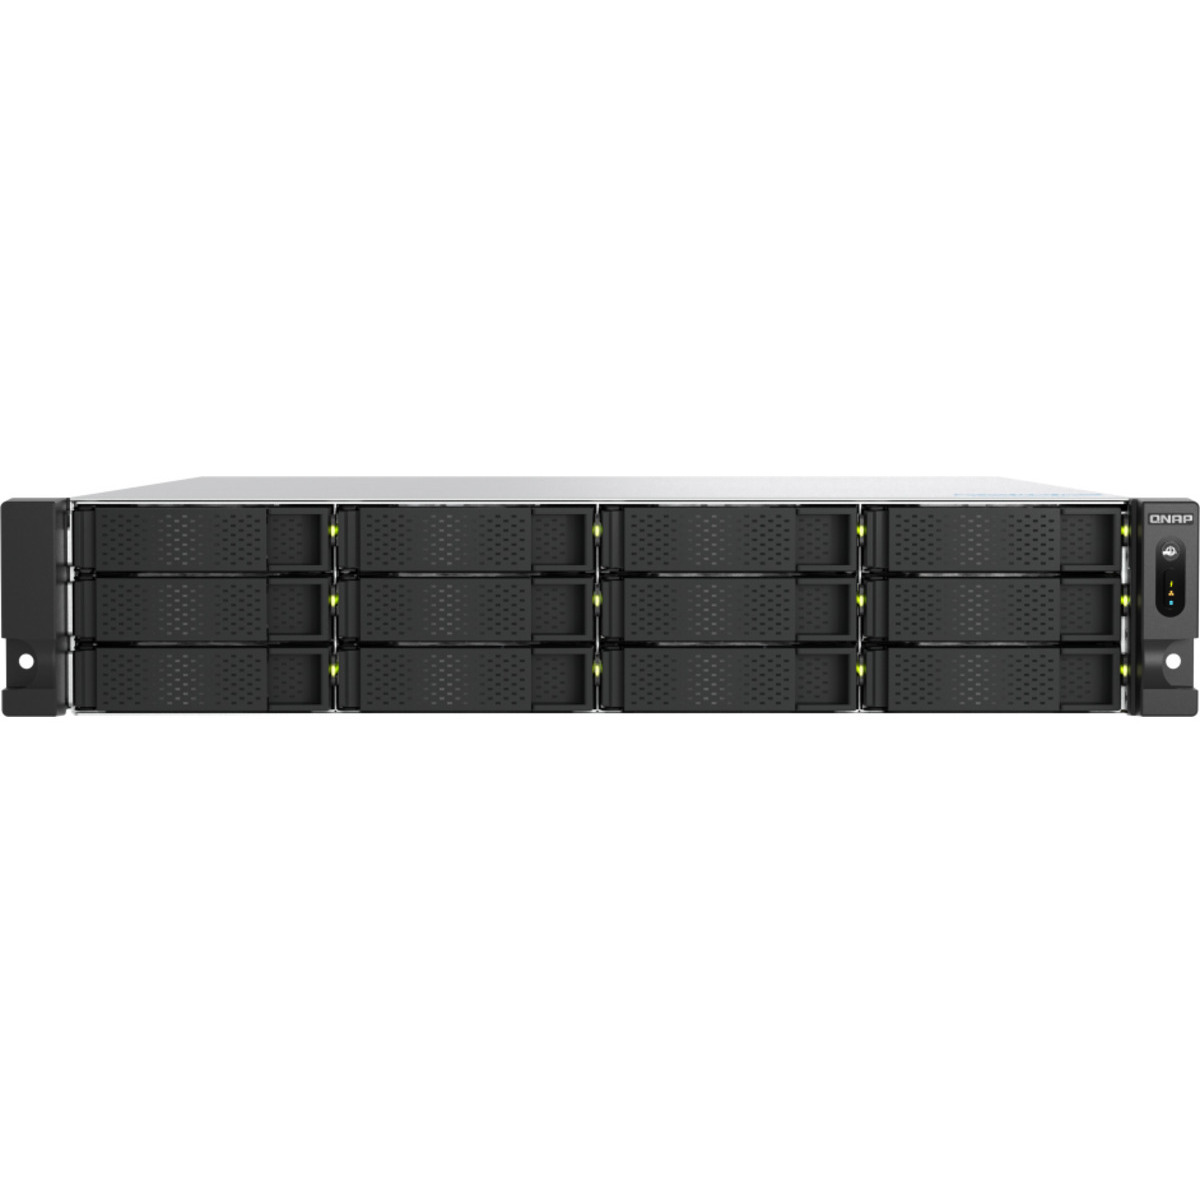 QNAP TS-h1277AXU-RP QuTS hero Ryzen 5 32tb 12-Bay RackMount Large Business / Enterprise NAS - Network Attached Storage Device 8x4tb Western Digital Red Plus WD40EFPX 3.5 5400rpm SATA 6Gb/s HDD NAS Class Drives Installed - Burn-In Tested TS-h1277AXU-RP QuTS hero Ryzen 5